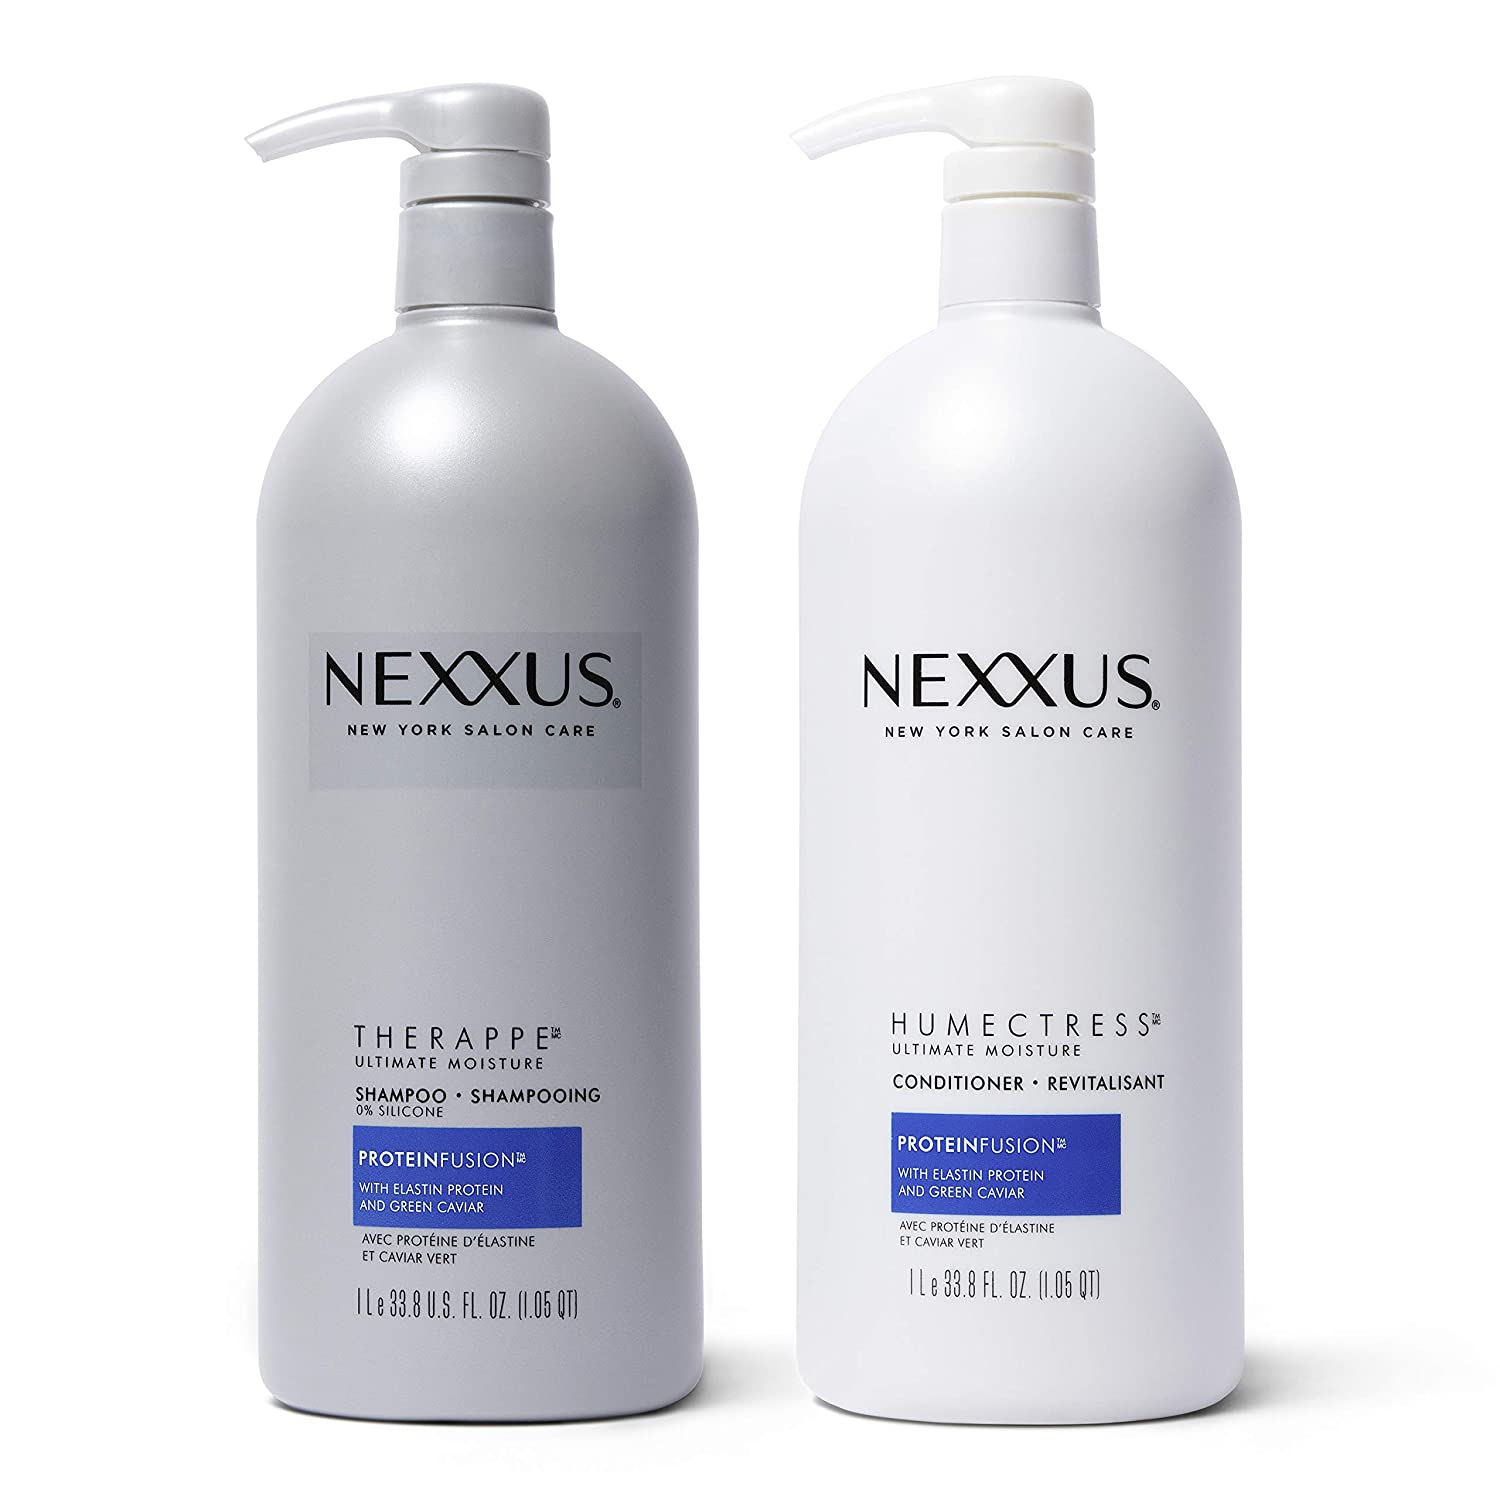 Nexxus Shampoo and Conditioner Therappe and Humectress 33.8 oz 2 Count - $20.99